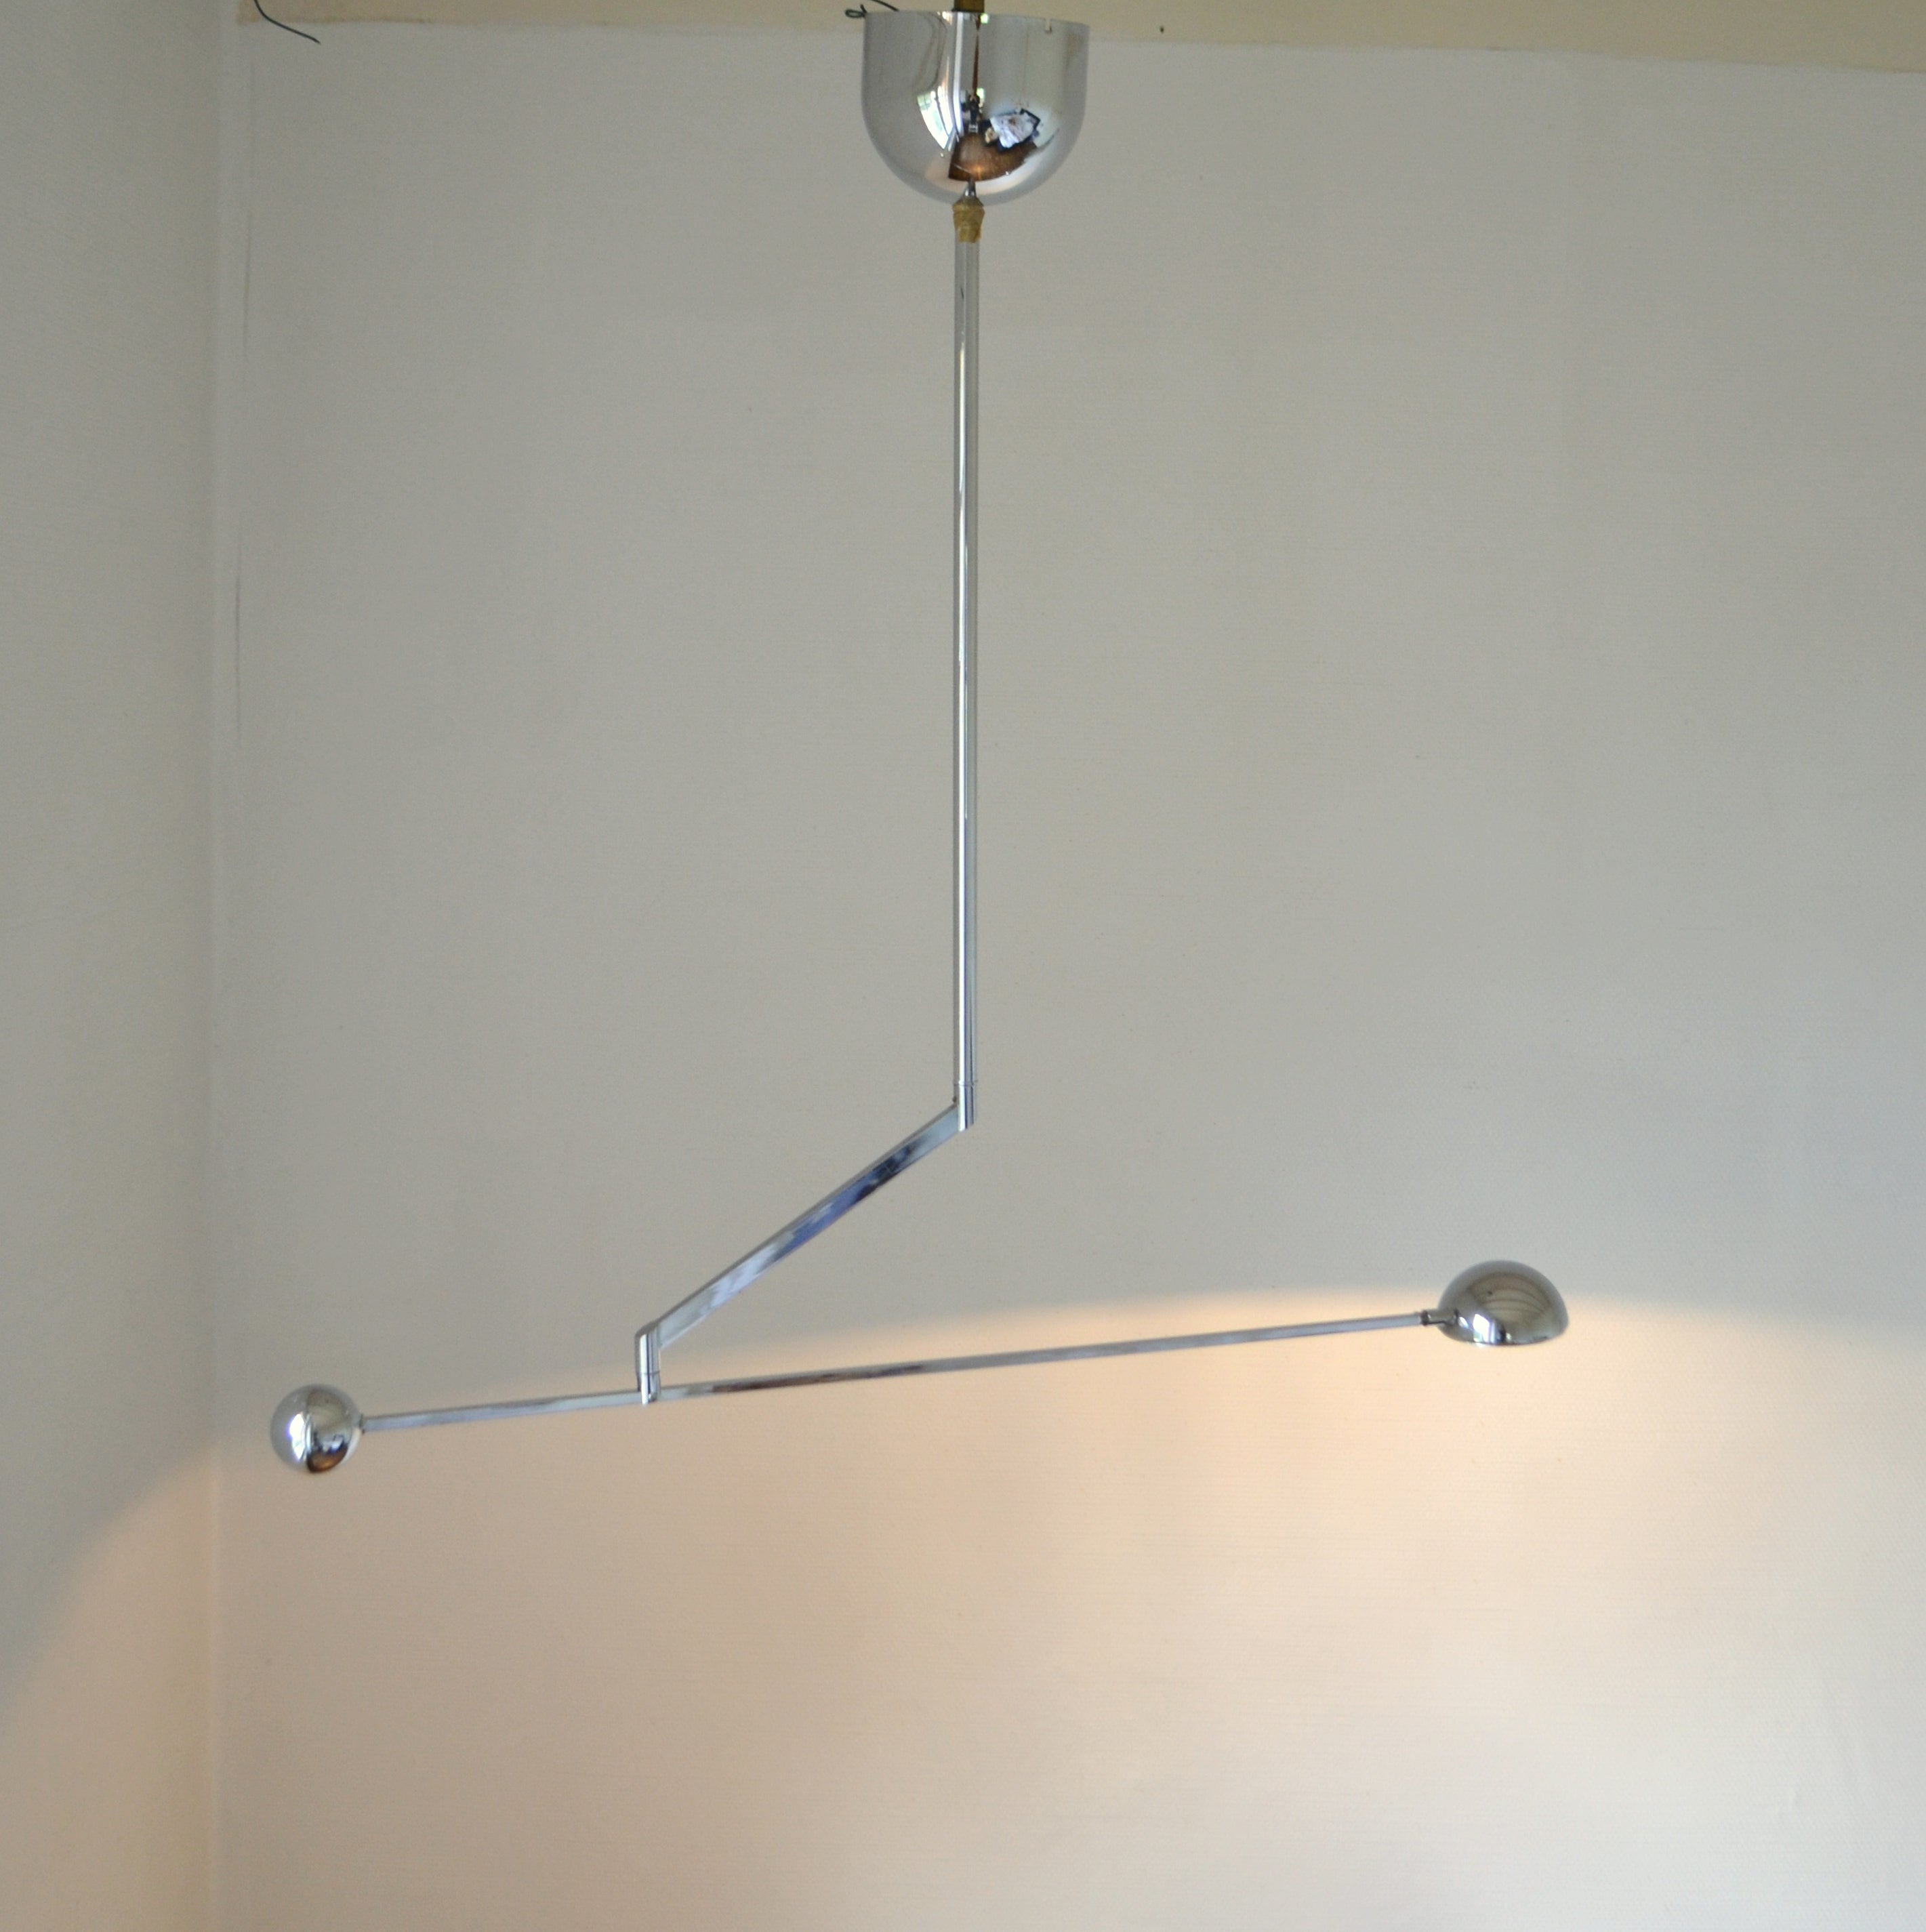 Minimalist counterbalance chrome pendant lamp with spotlight is super flexible, with an arm adjustable to 180 degrees. The halogen light source is attached to a long arm holding a spherical counter weight. The arm sits on an angled stand with